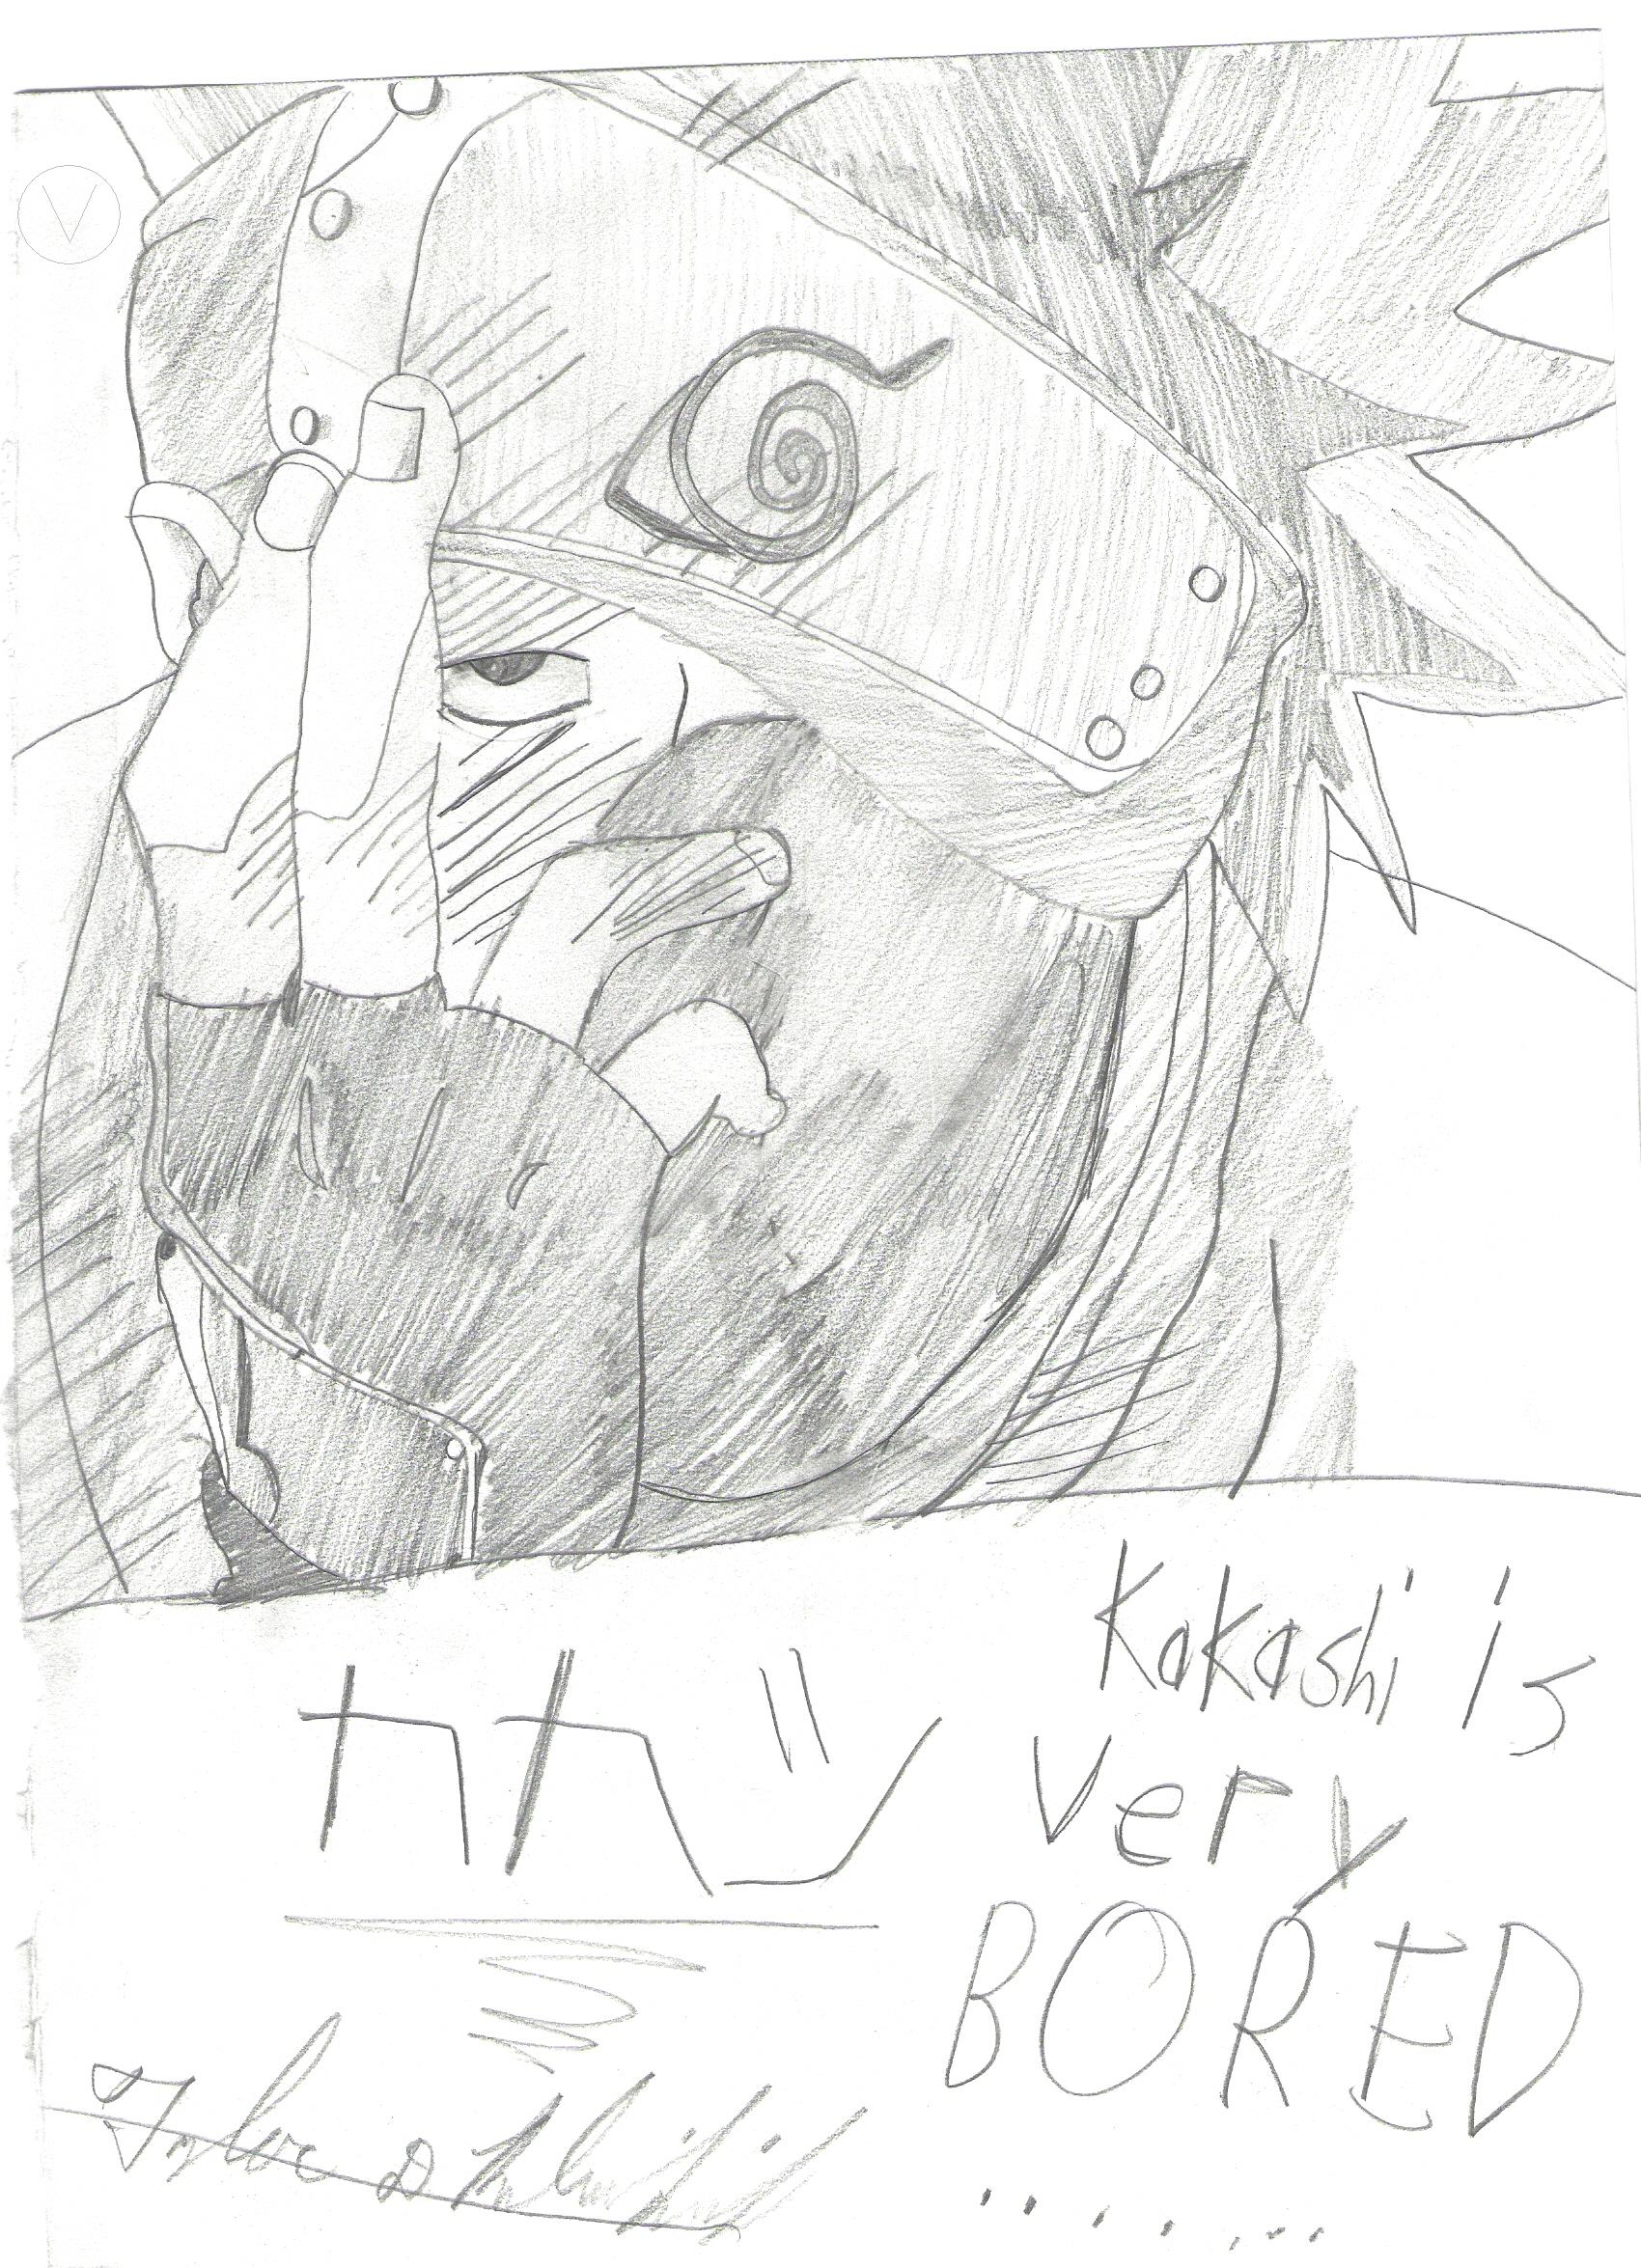 Kakashi *yawn* is very bored, (UPDATE!) by Lurking_Shadow_Creature